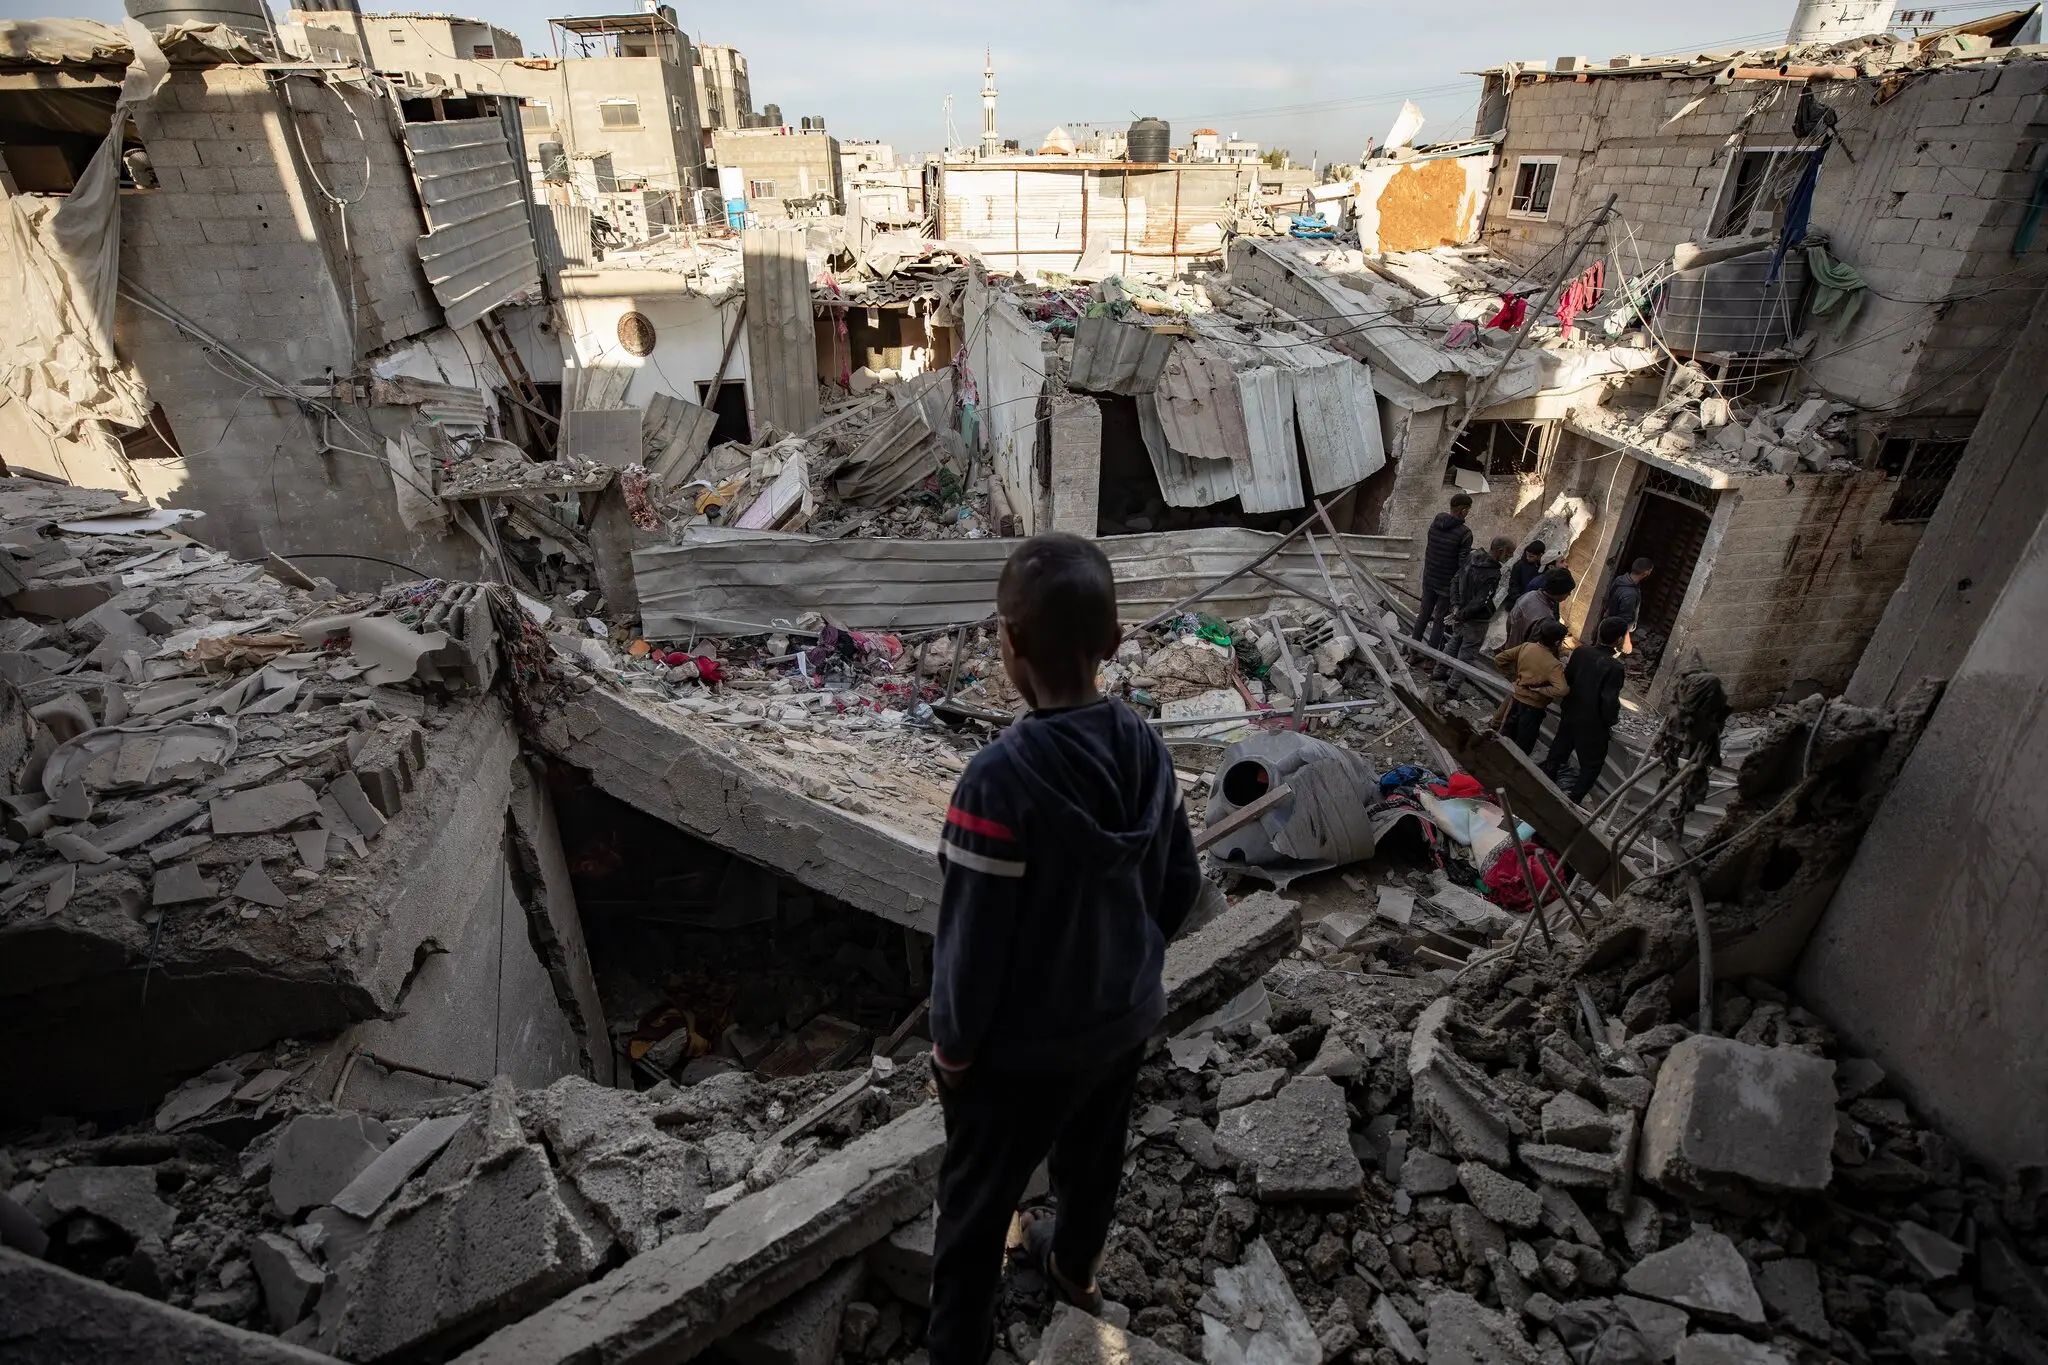 A child in a building destroyed by the occupation in Rafah, captured by Haitham Emad (Shutterstock)